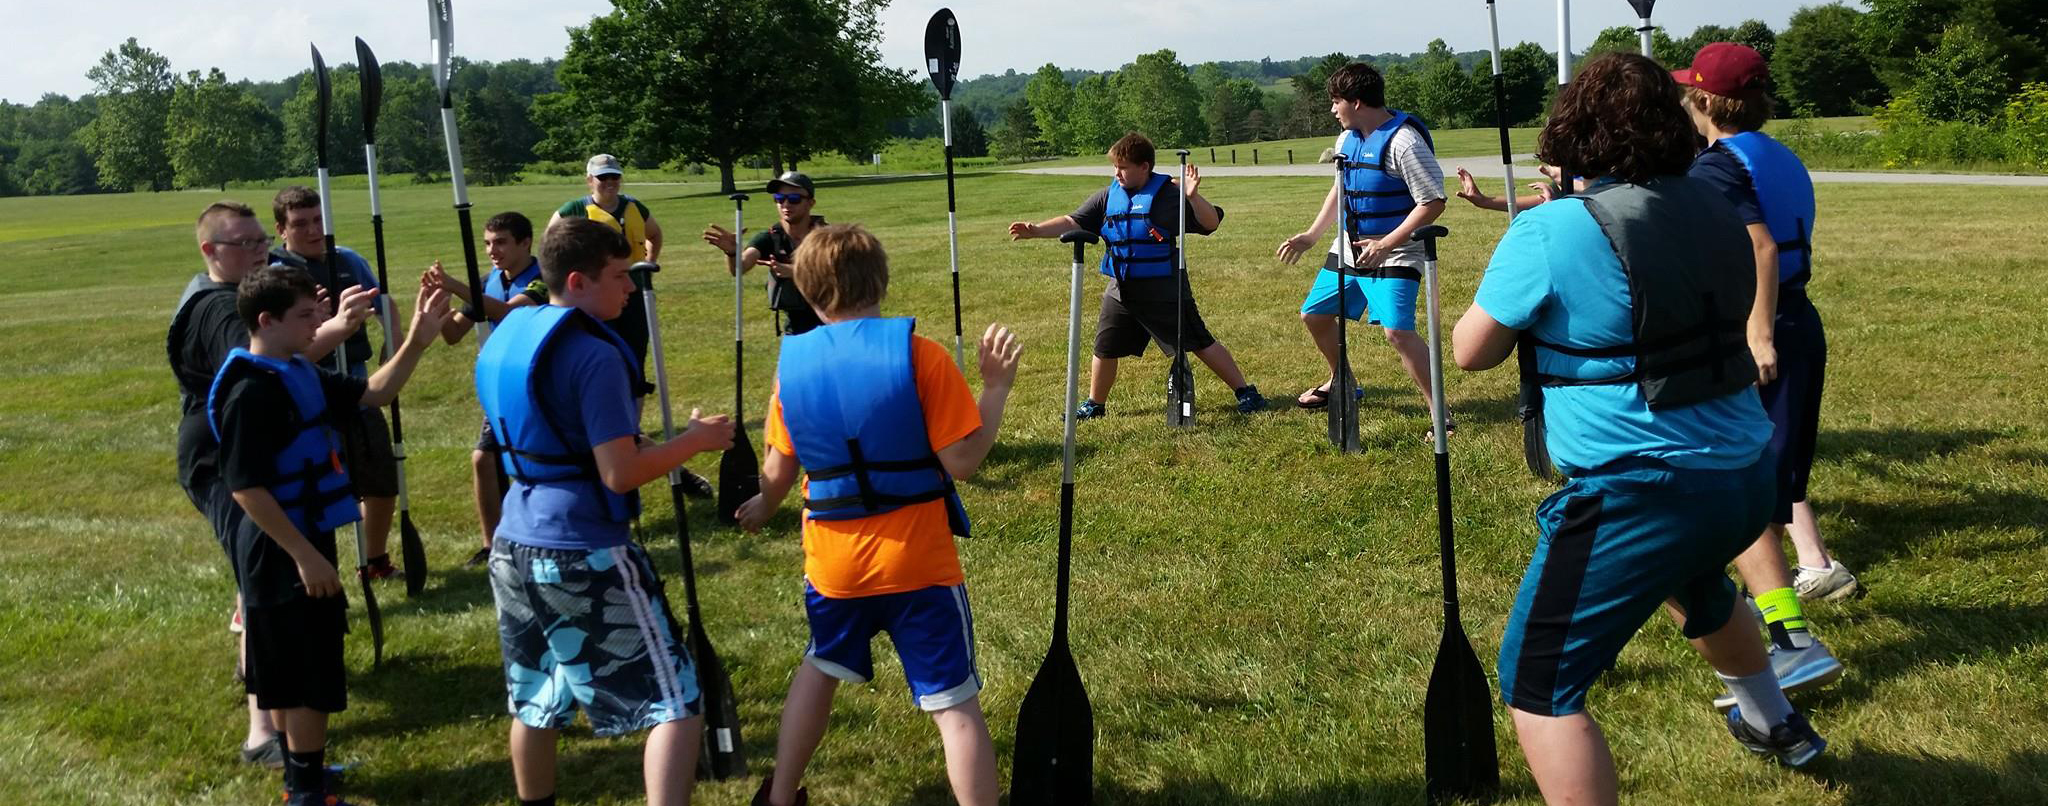 Kids standing in a circle holding canoe paddles and wearing life vests